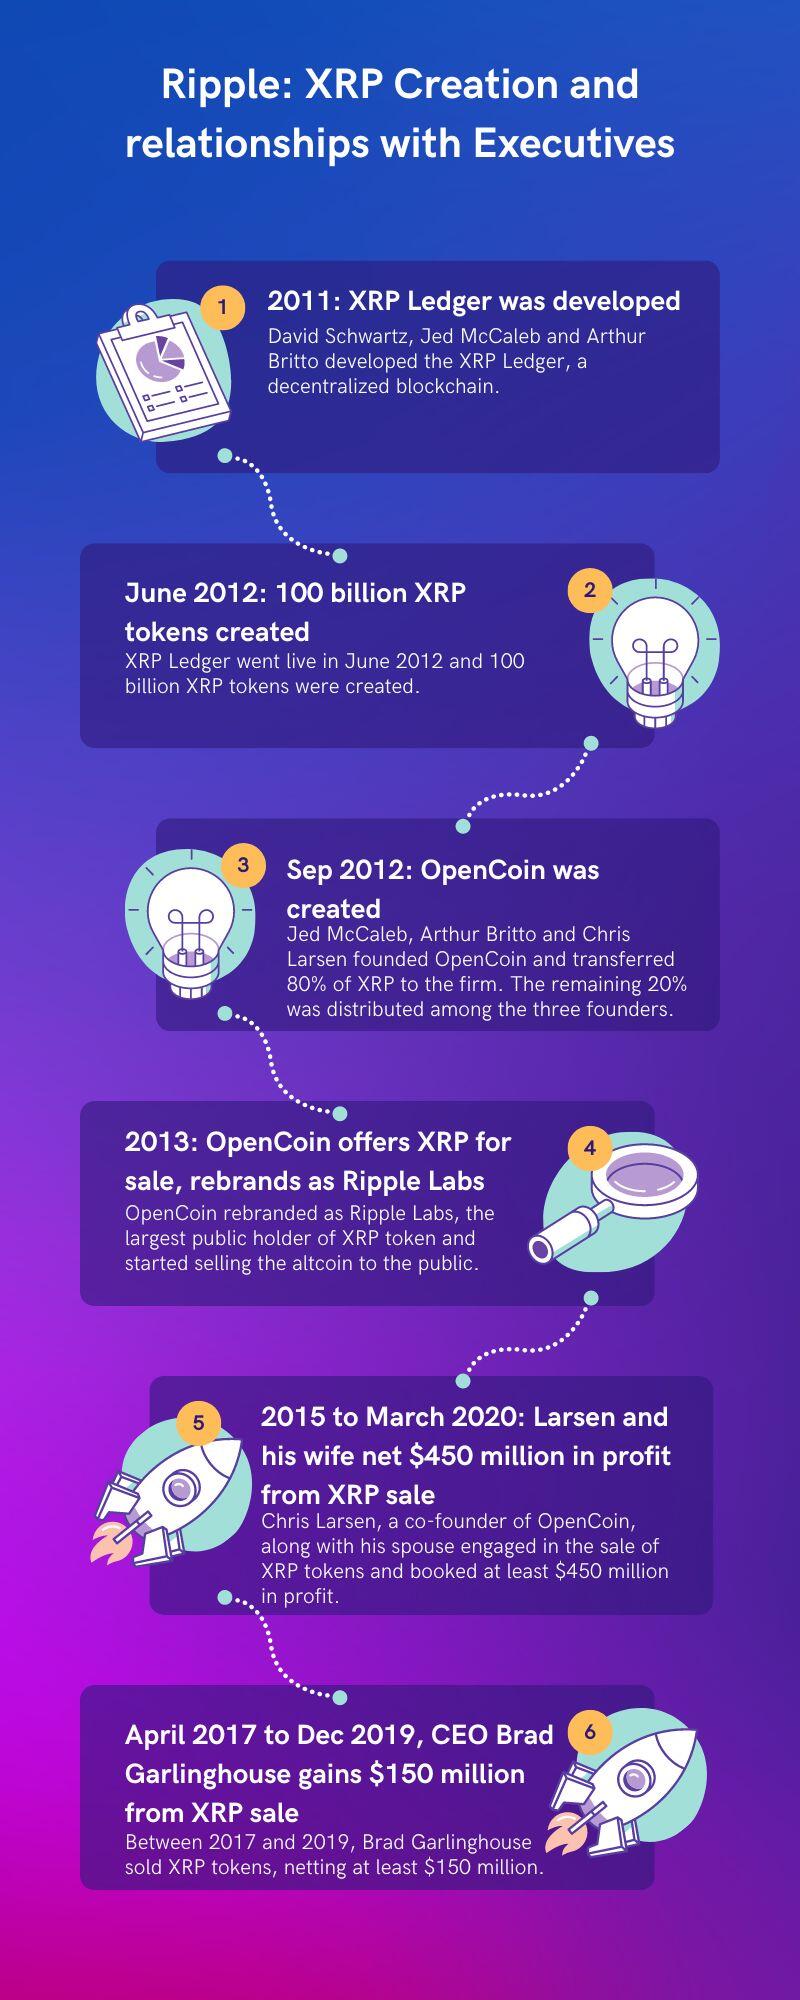 Ripple's creation and sale by OpenCoin and executives